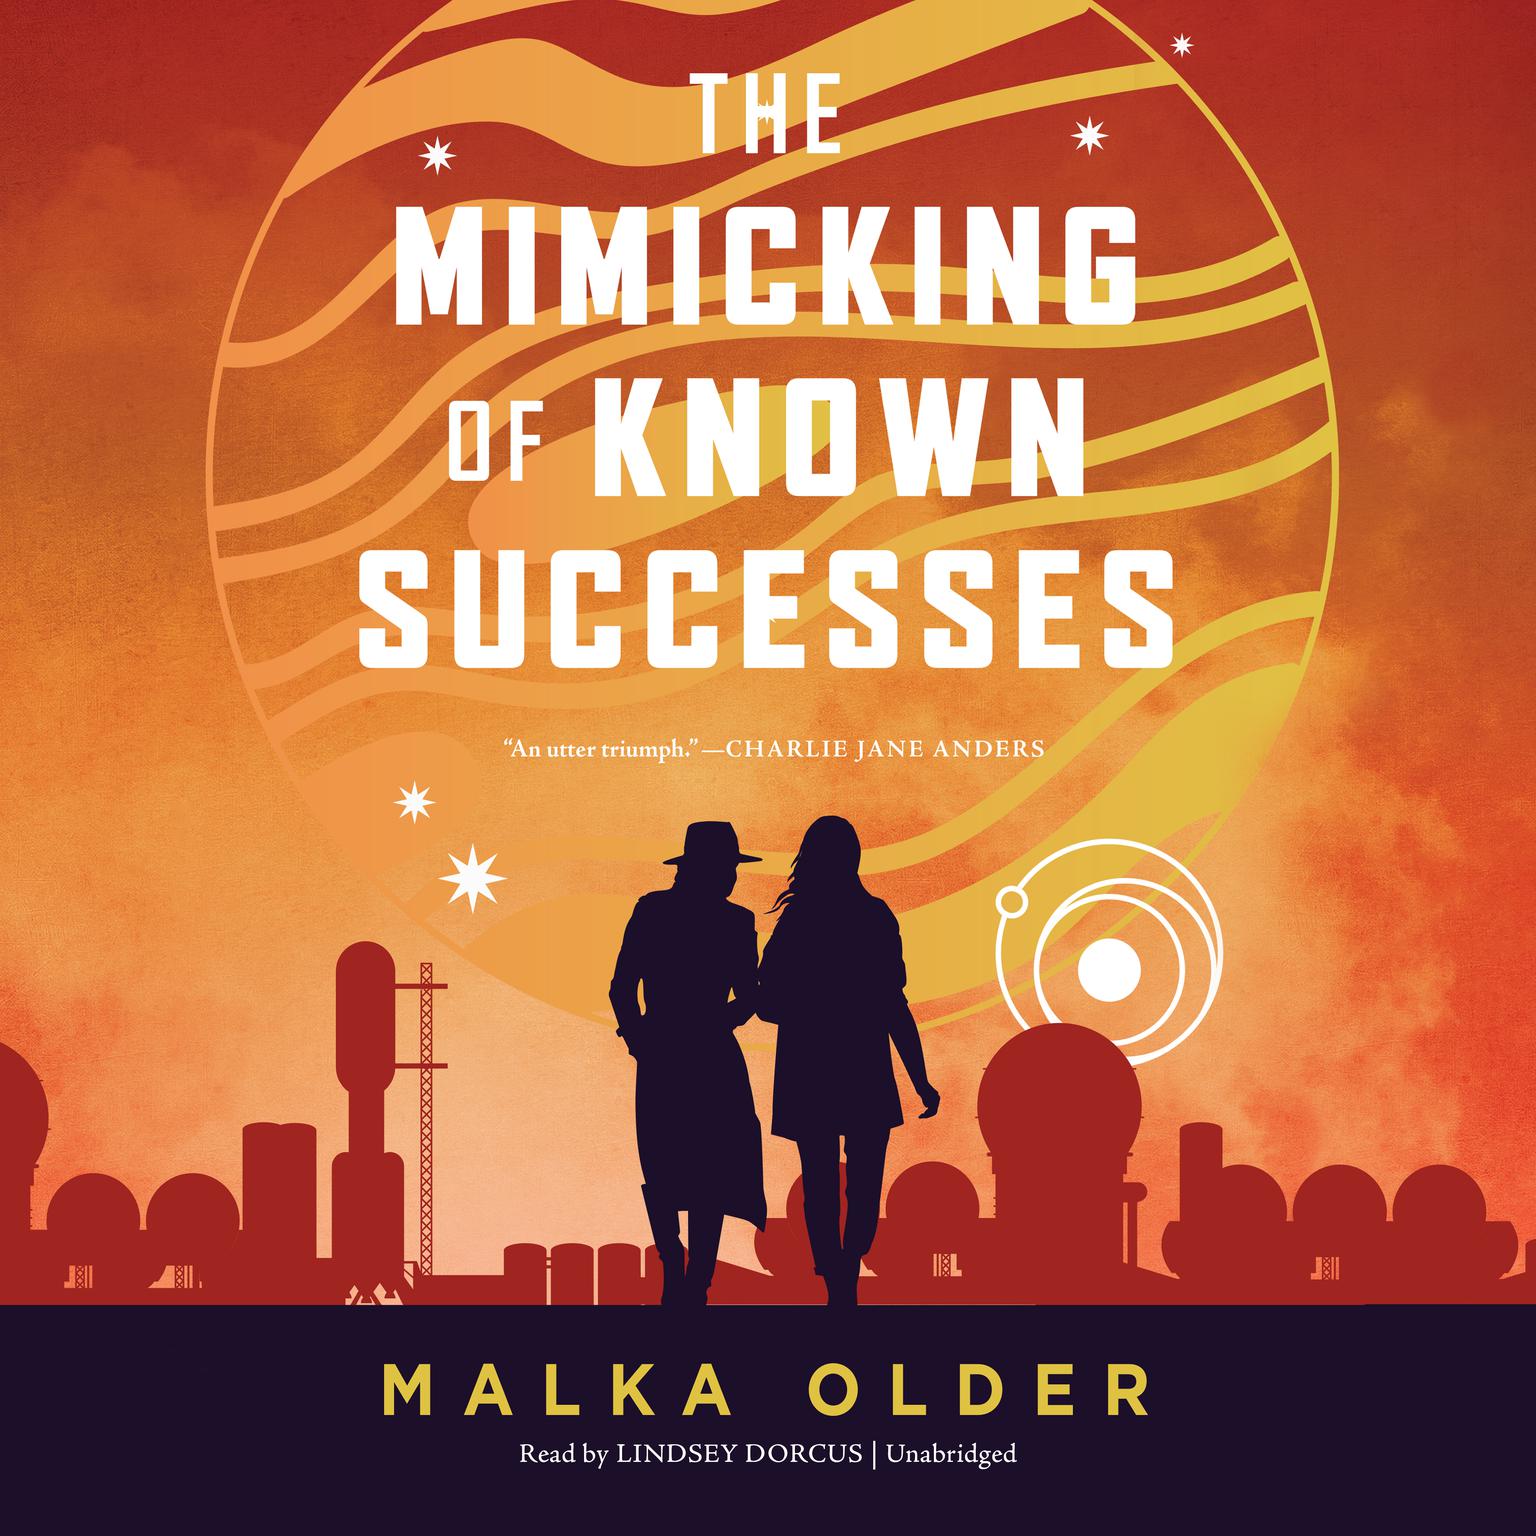 The Mimicking of Known Successes (AudiobookFormat, 2023, Blackstone Publishing)